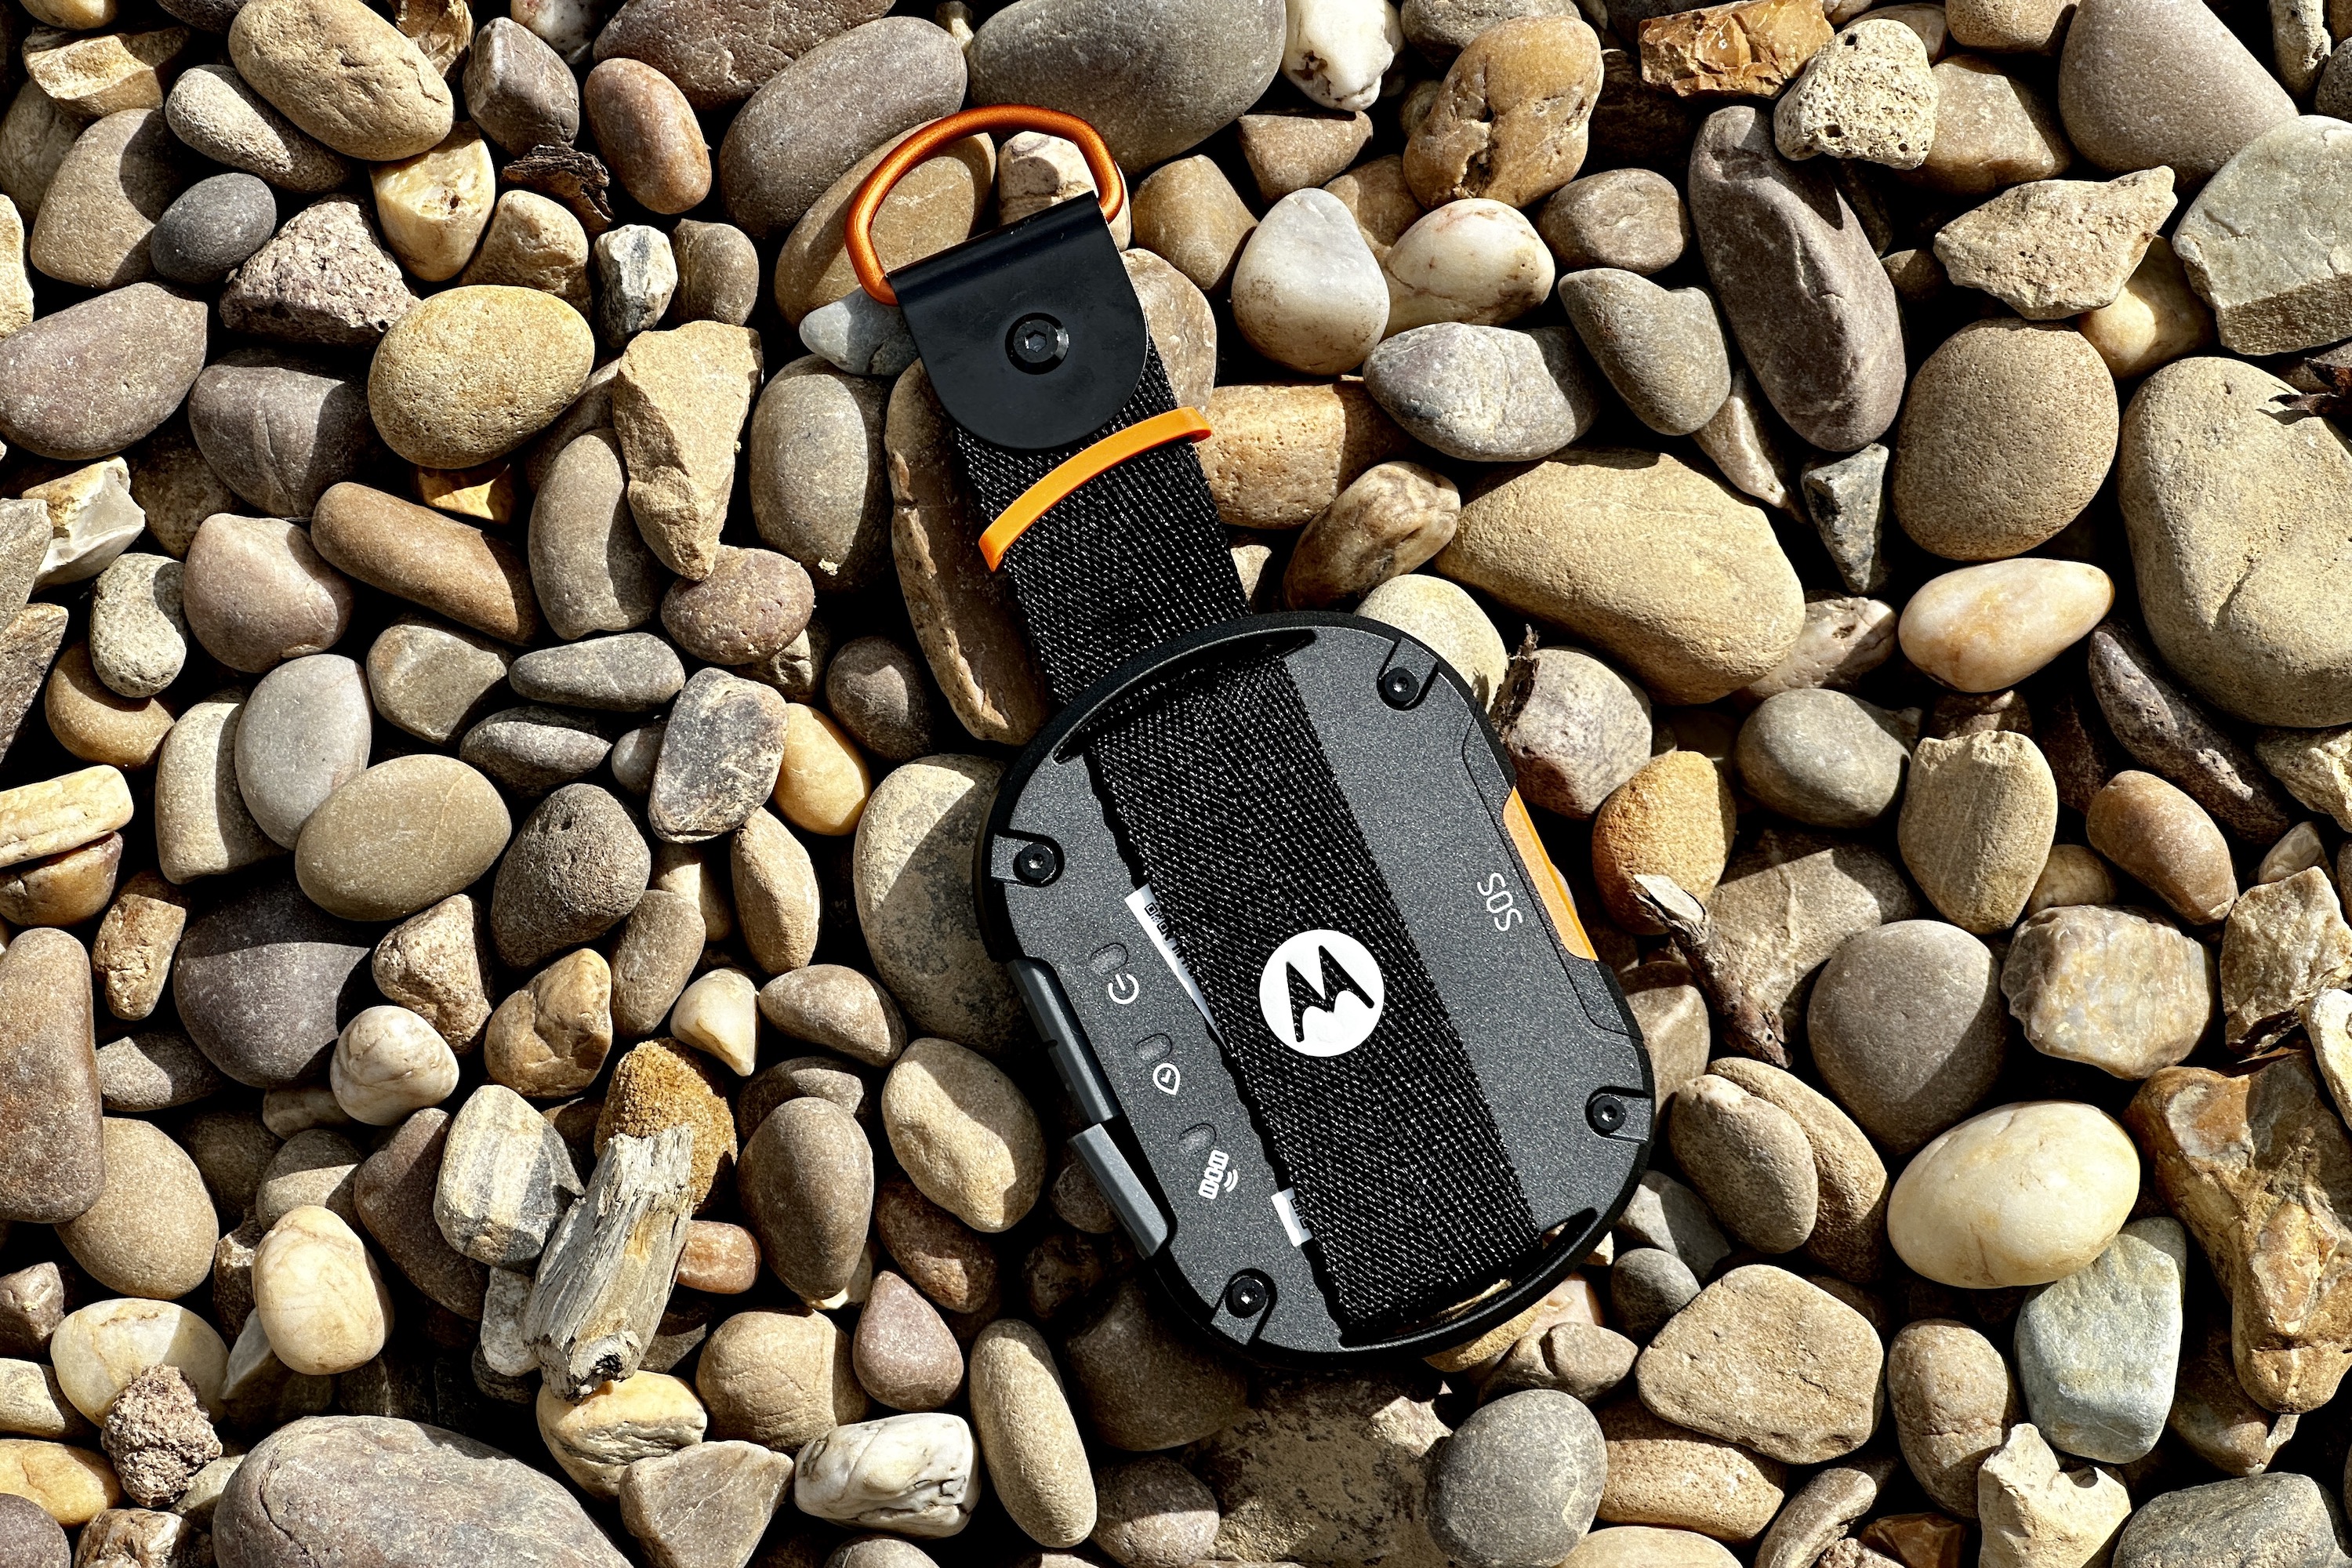 The Motorola Defy 2 - a rugged 5G smartphone with satellite